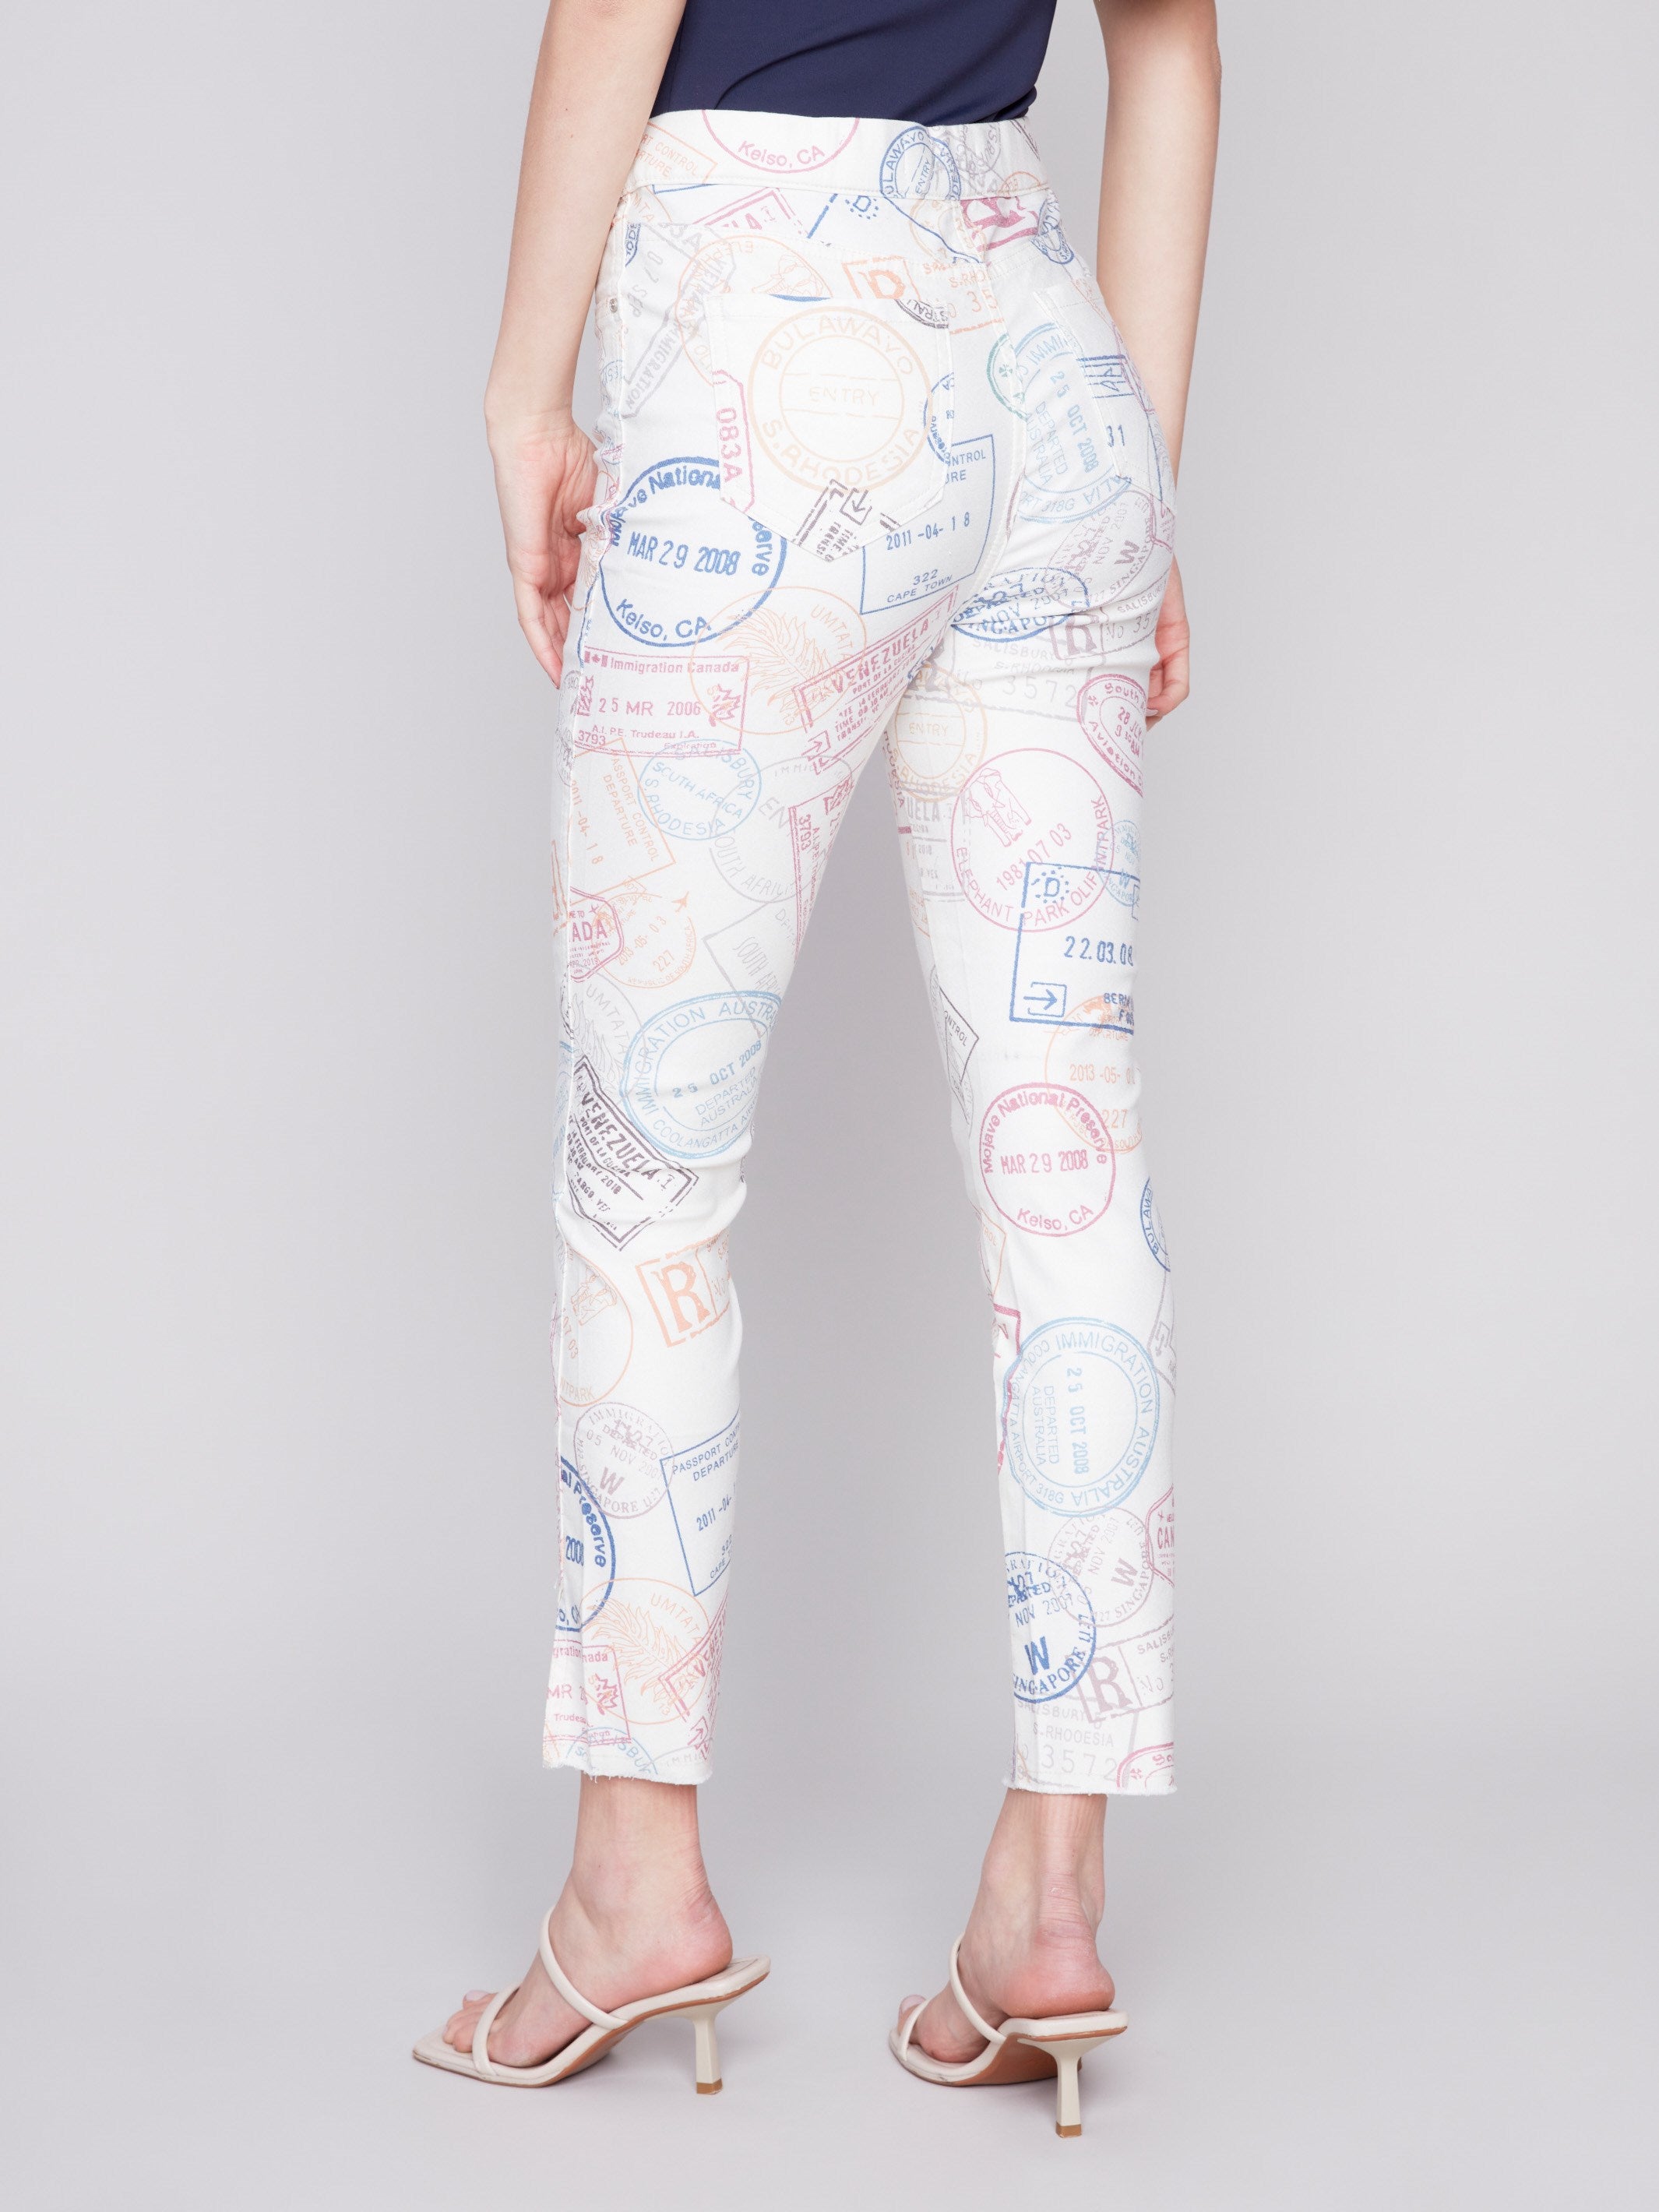 Charlie B Printed Pull-On Twill Pants with Split Hem - Stamps - Image 3